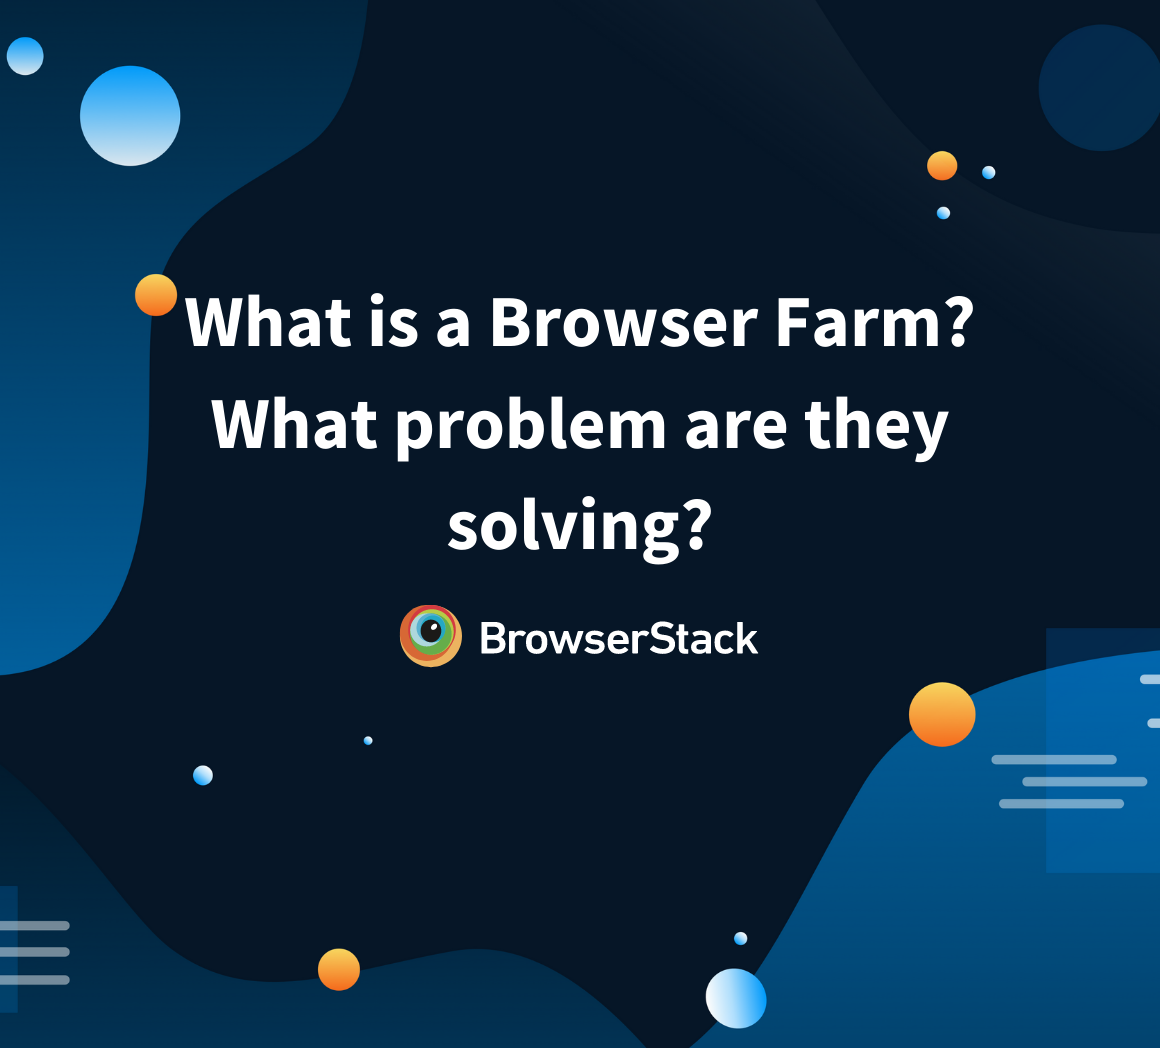 What is a Browser Farm?